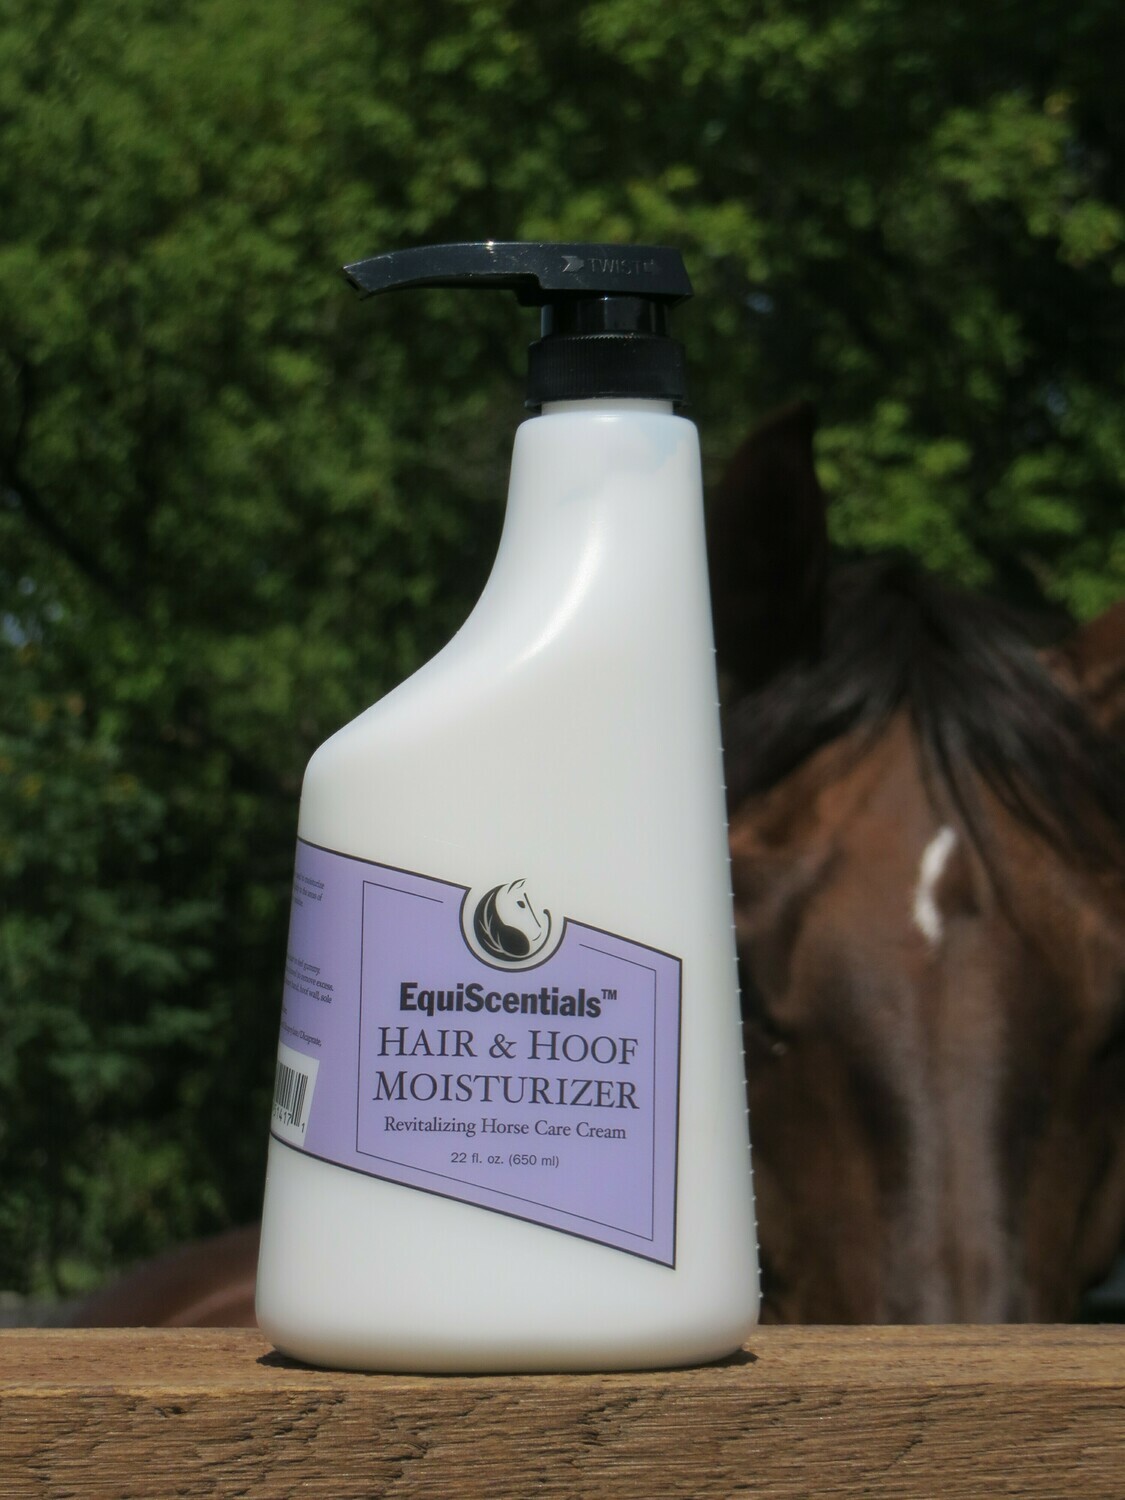 EquiScentials Hair and Hoof Moisturiser - Helps Dry Damaged Hooves and Coat